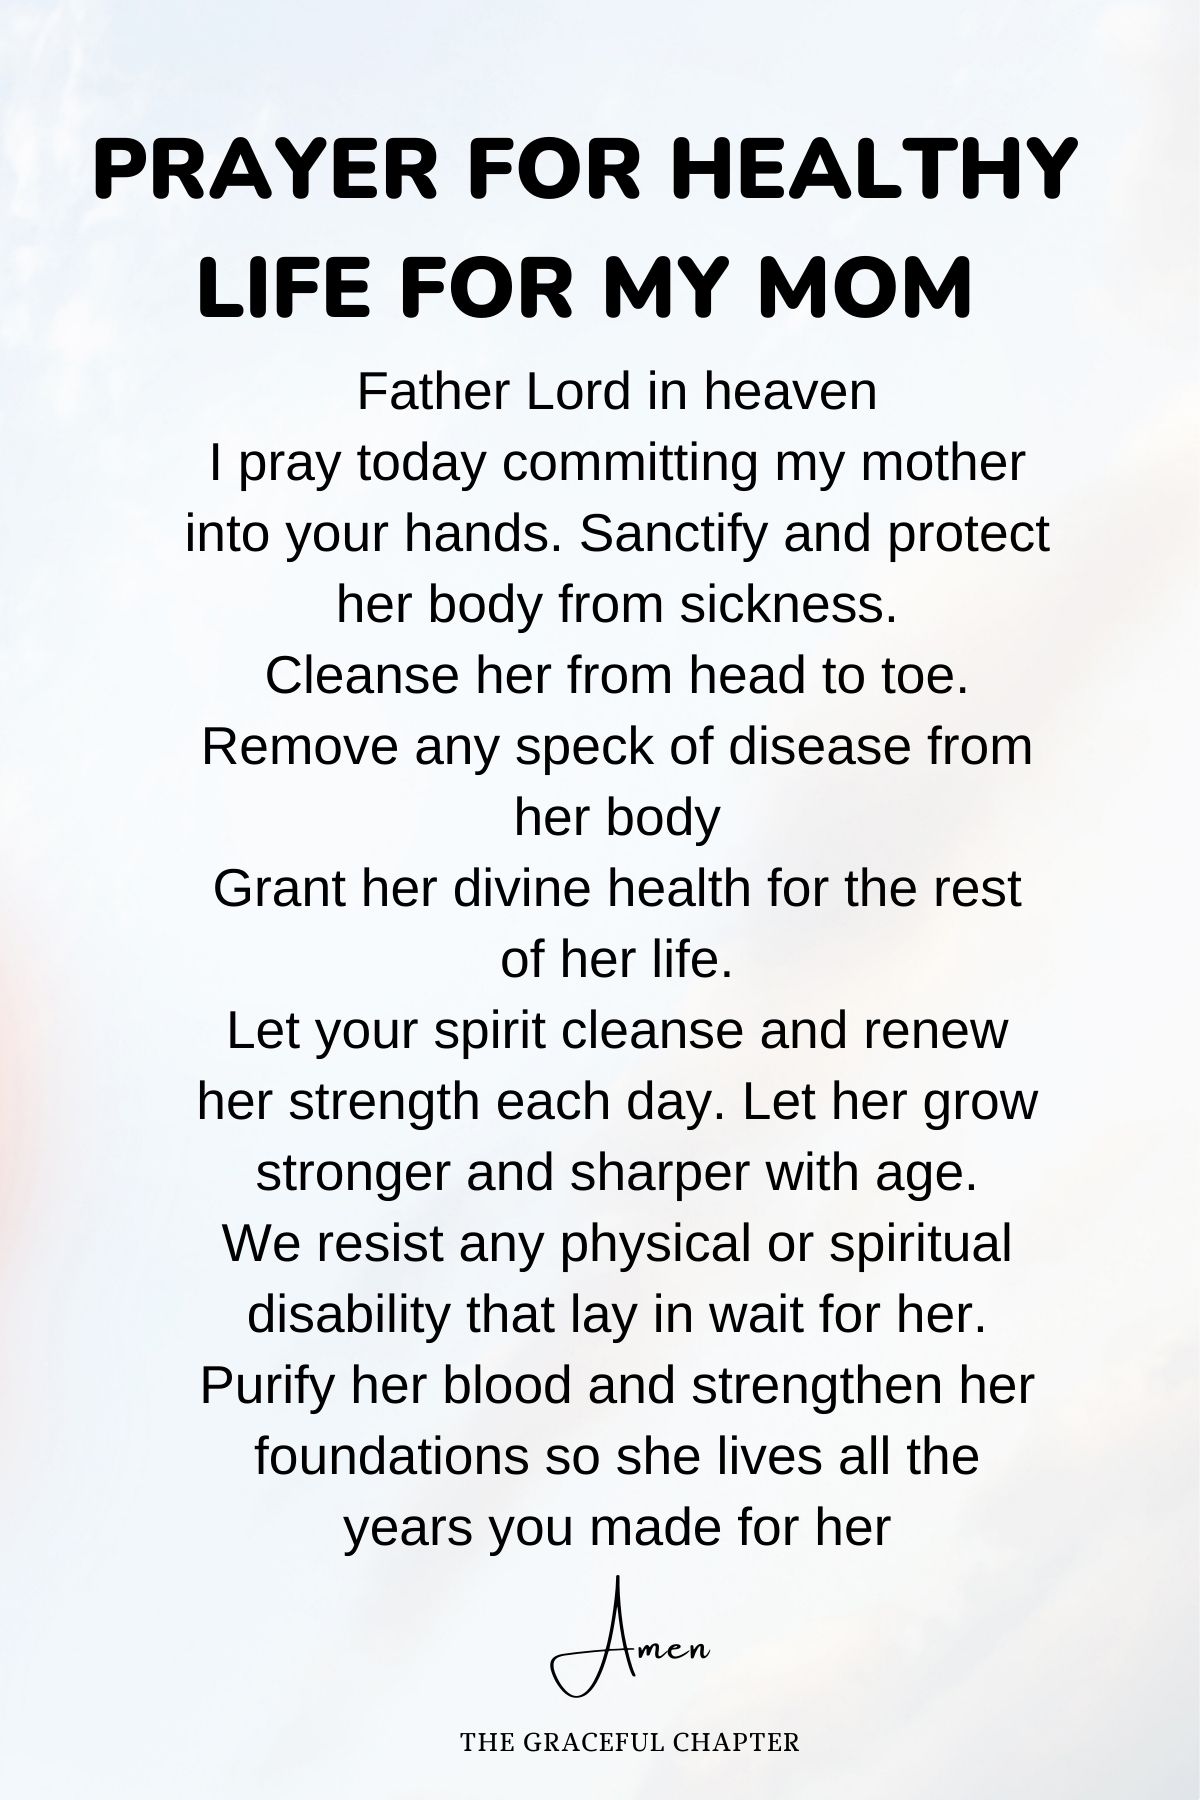 Prayer for healthy life for my mom